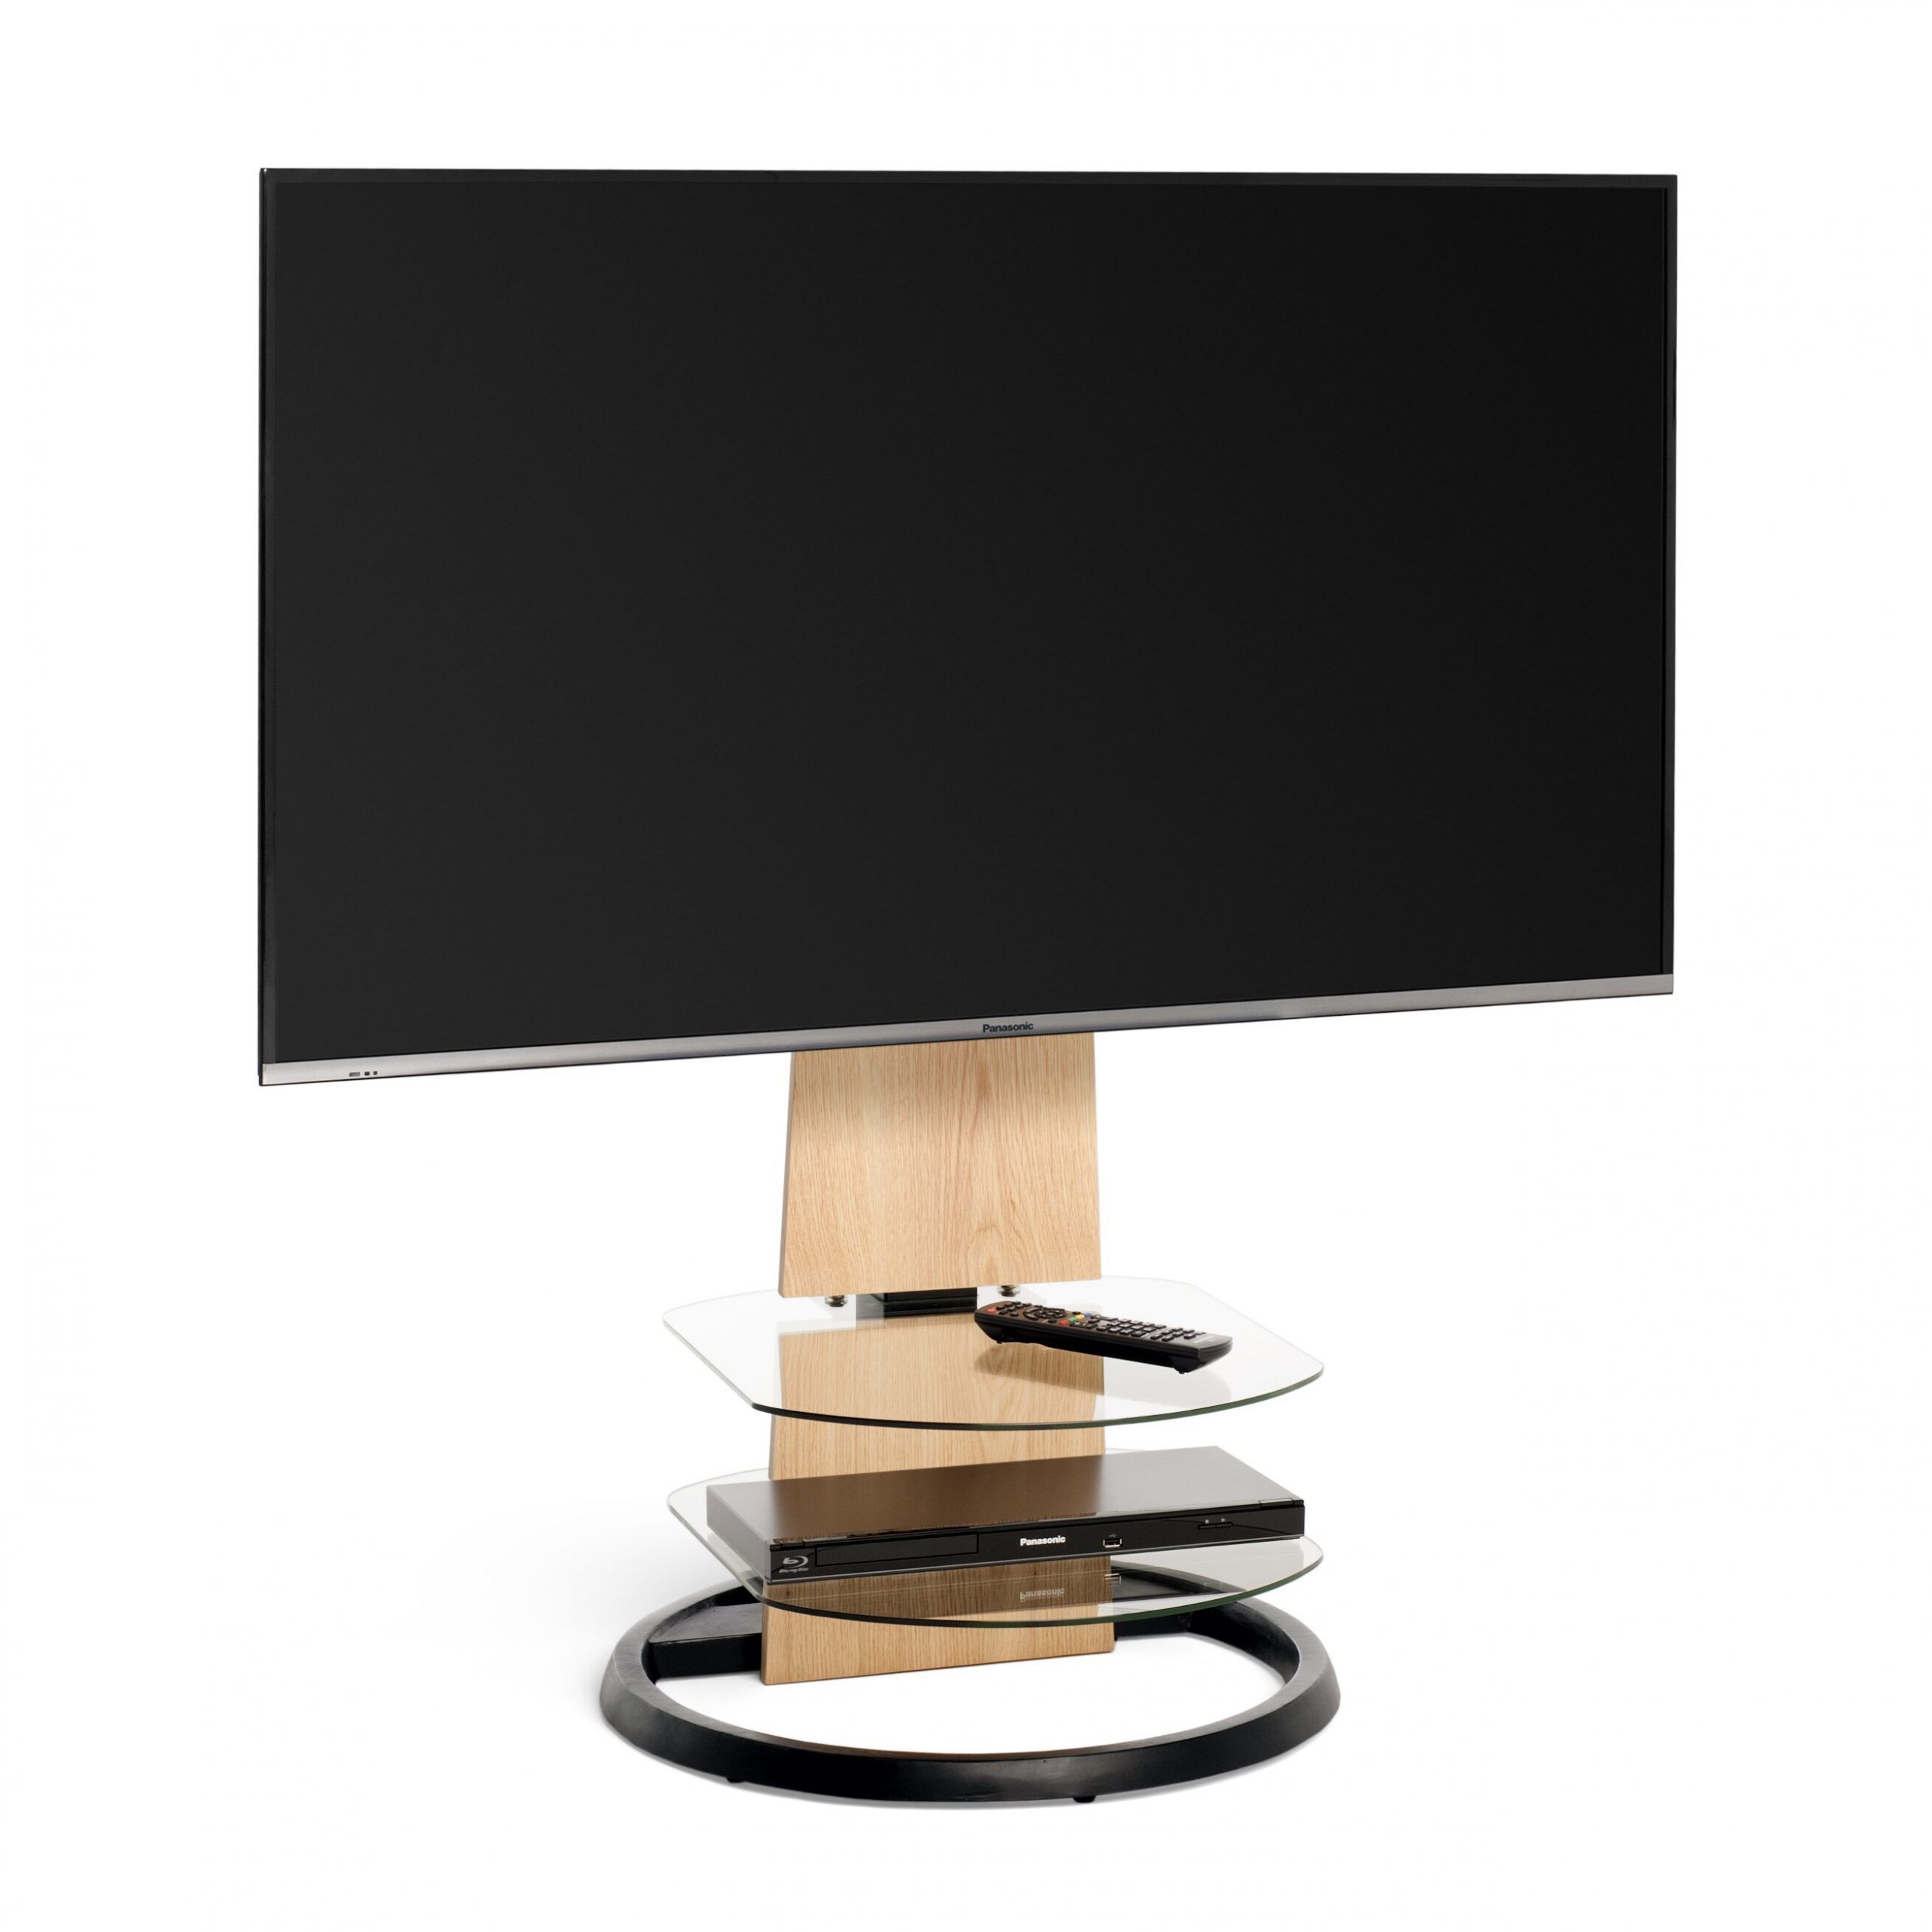 Techlink Monolith Tv Stand For Tvs Up To 55" | Wayfair Uk Throughout Techlink Tv Stands Sale (View 8 of 15)